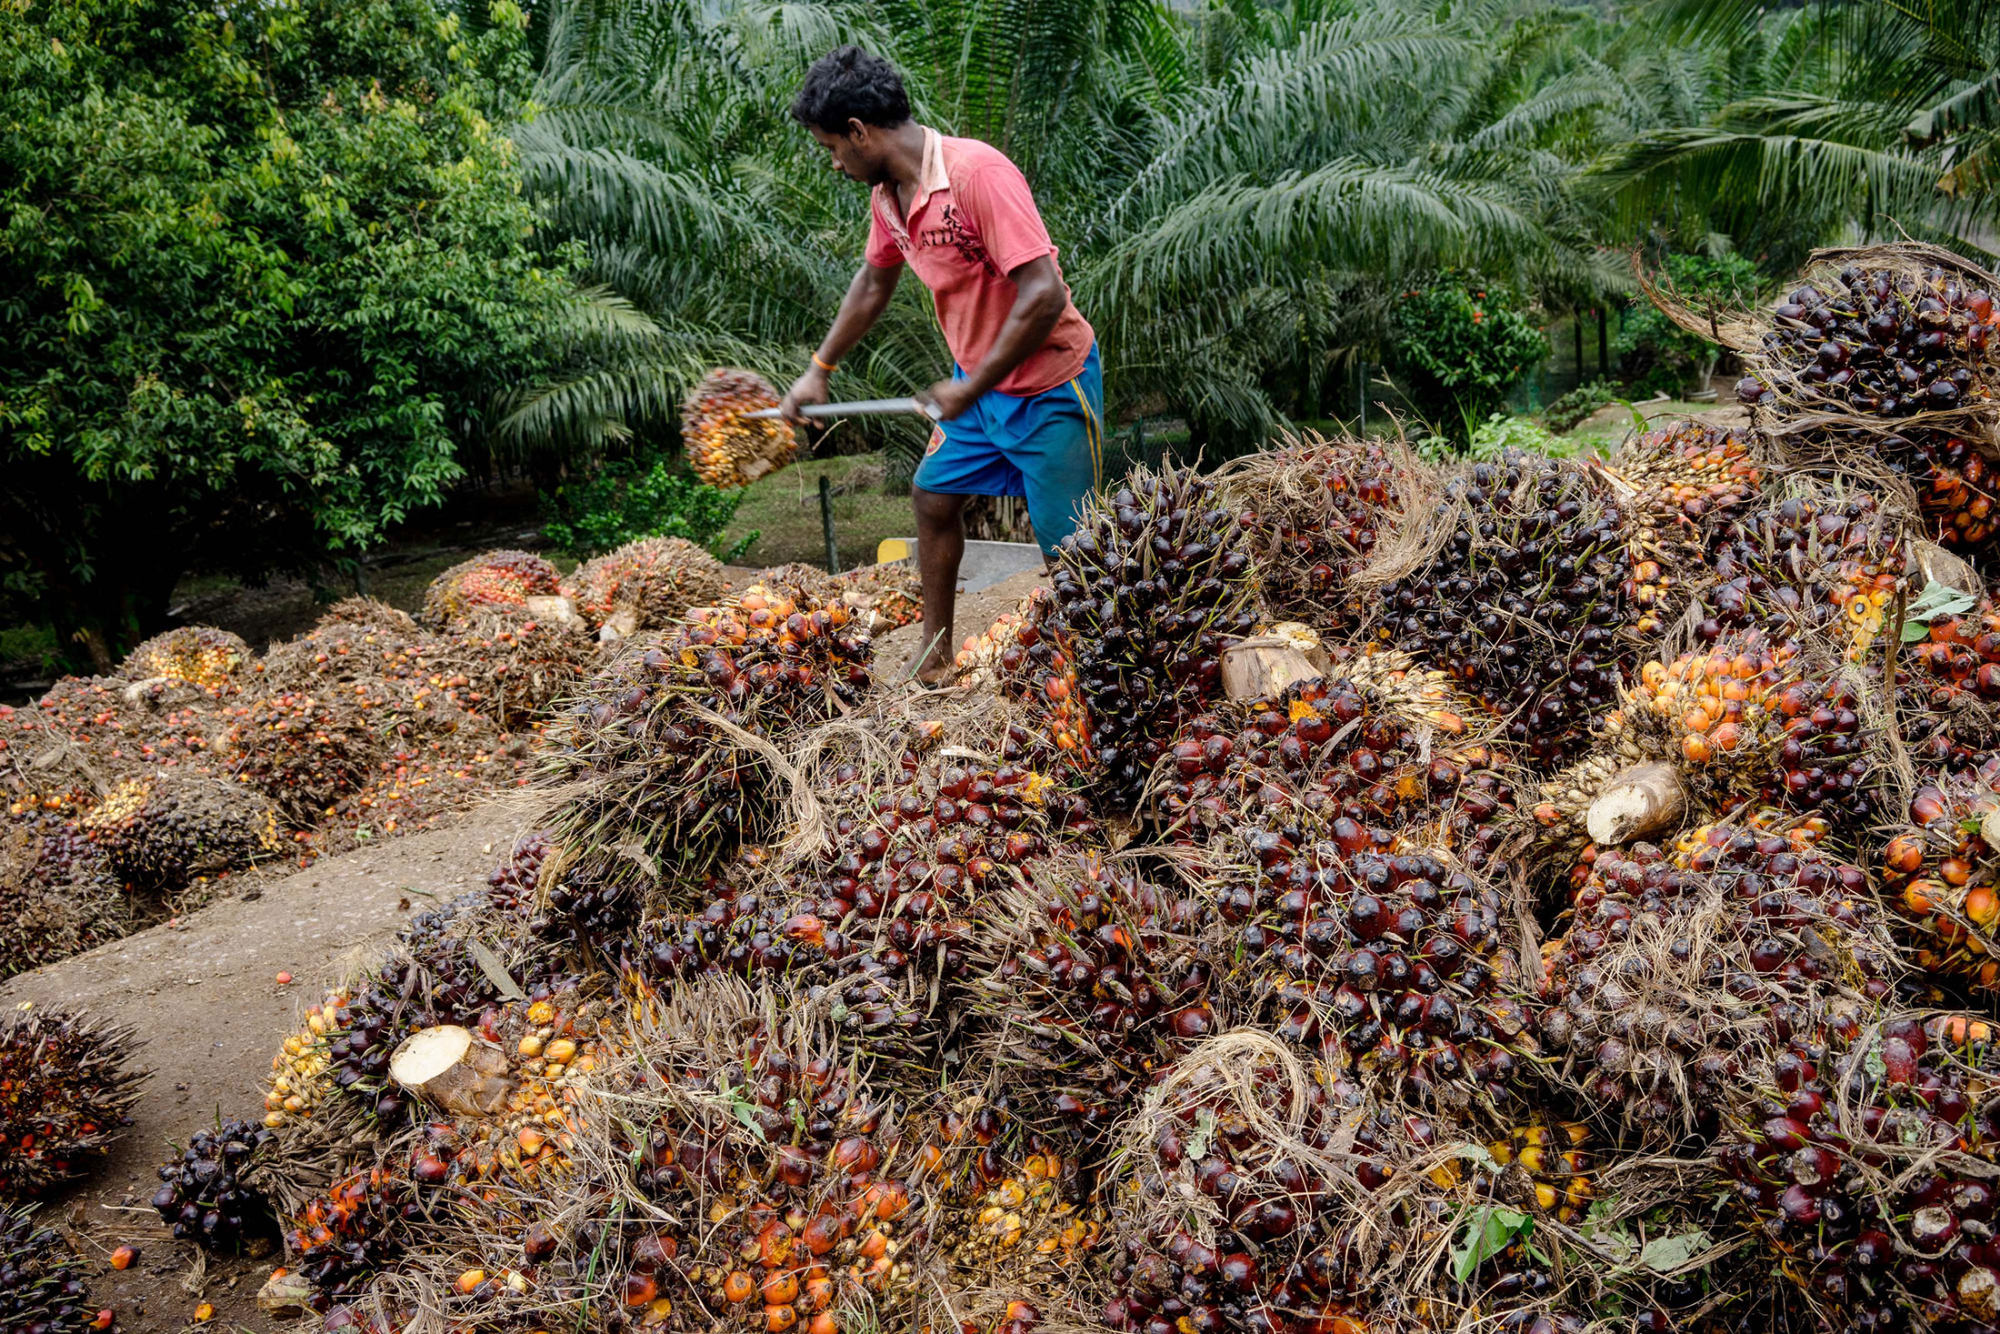 A worker loads palm fruit onto the back of a truck at a palm oil plantation in&nbsp;Malaysia.